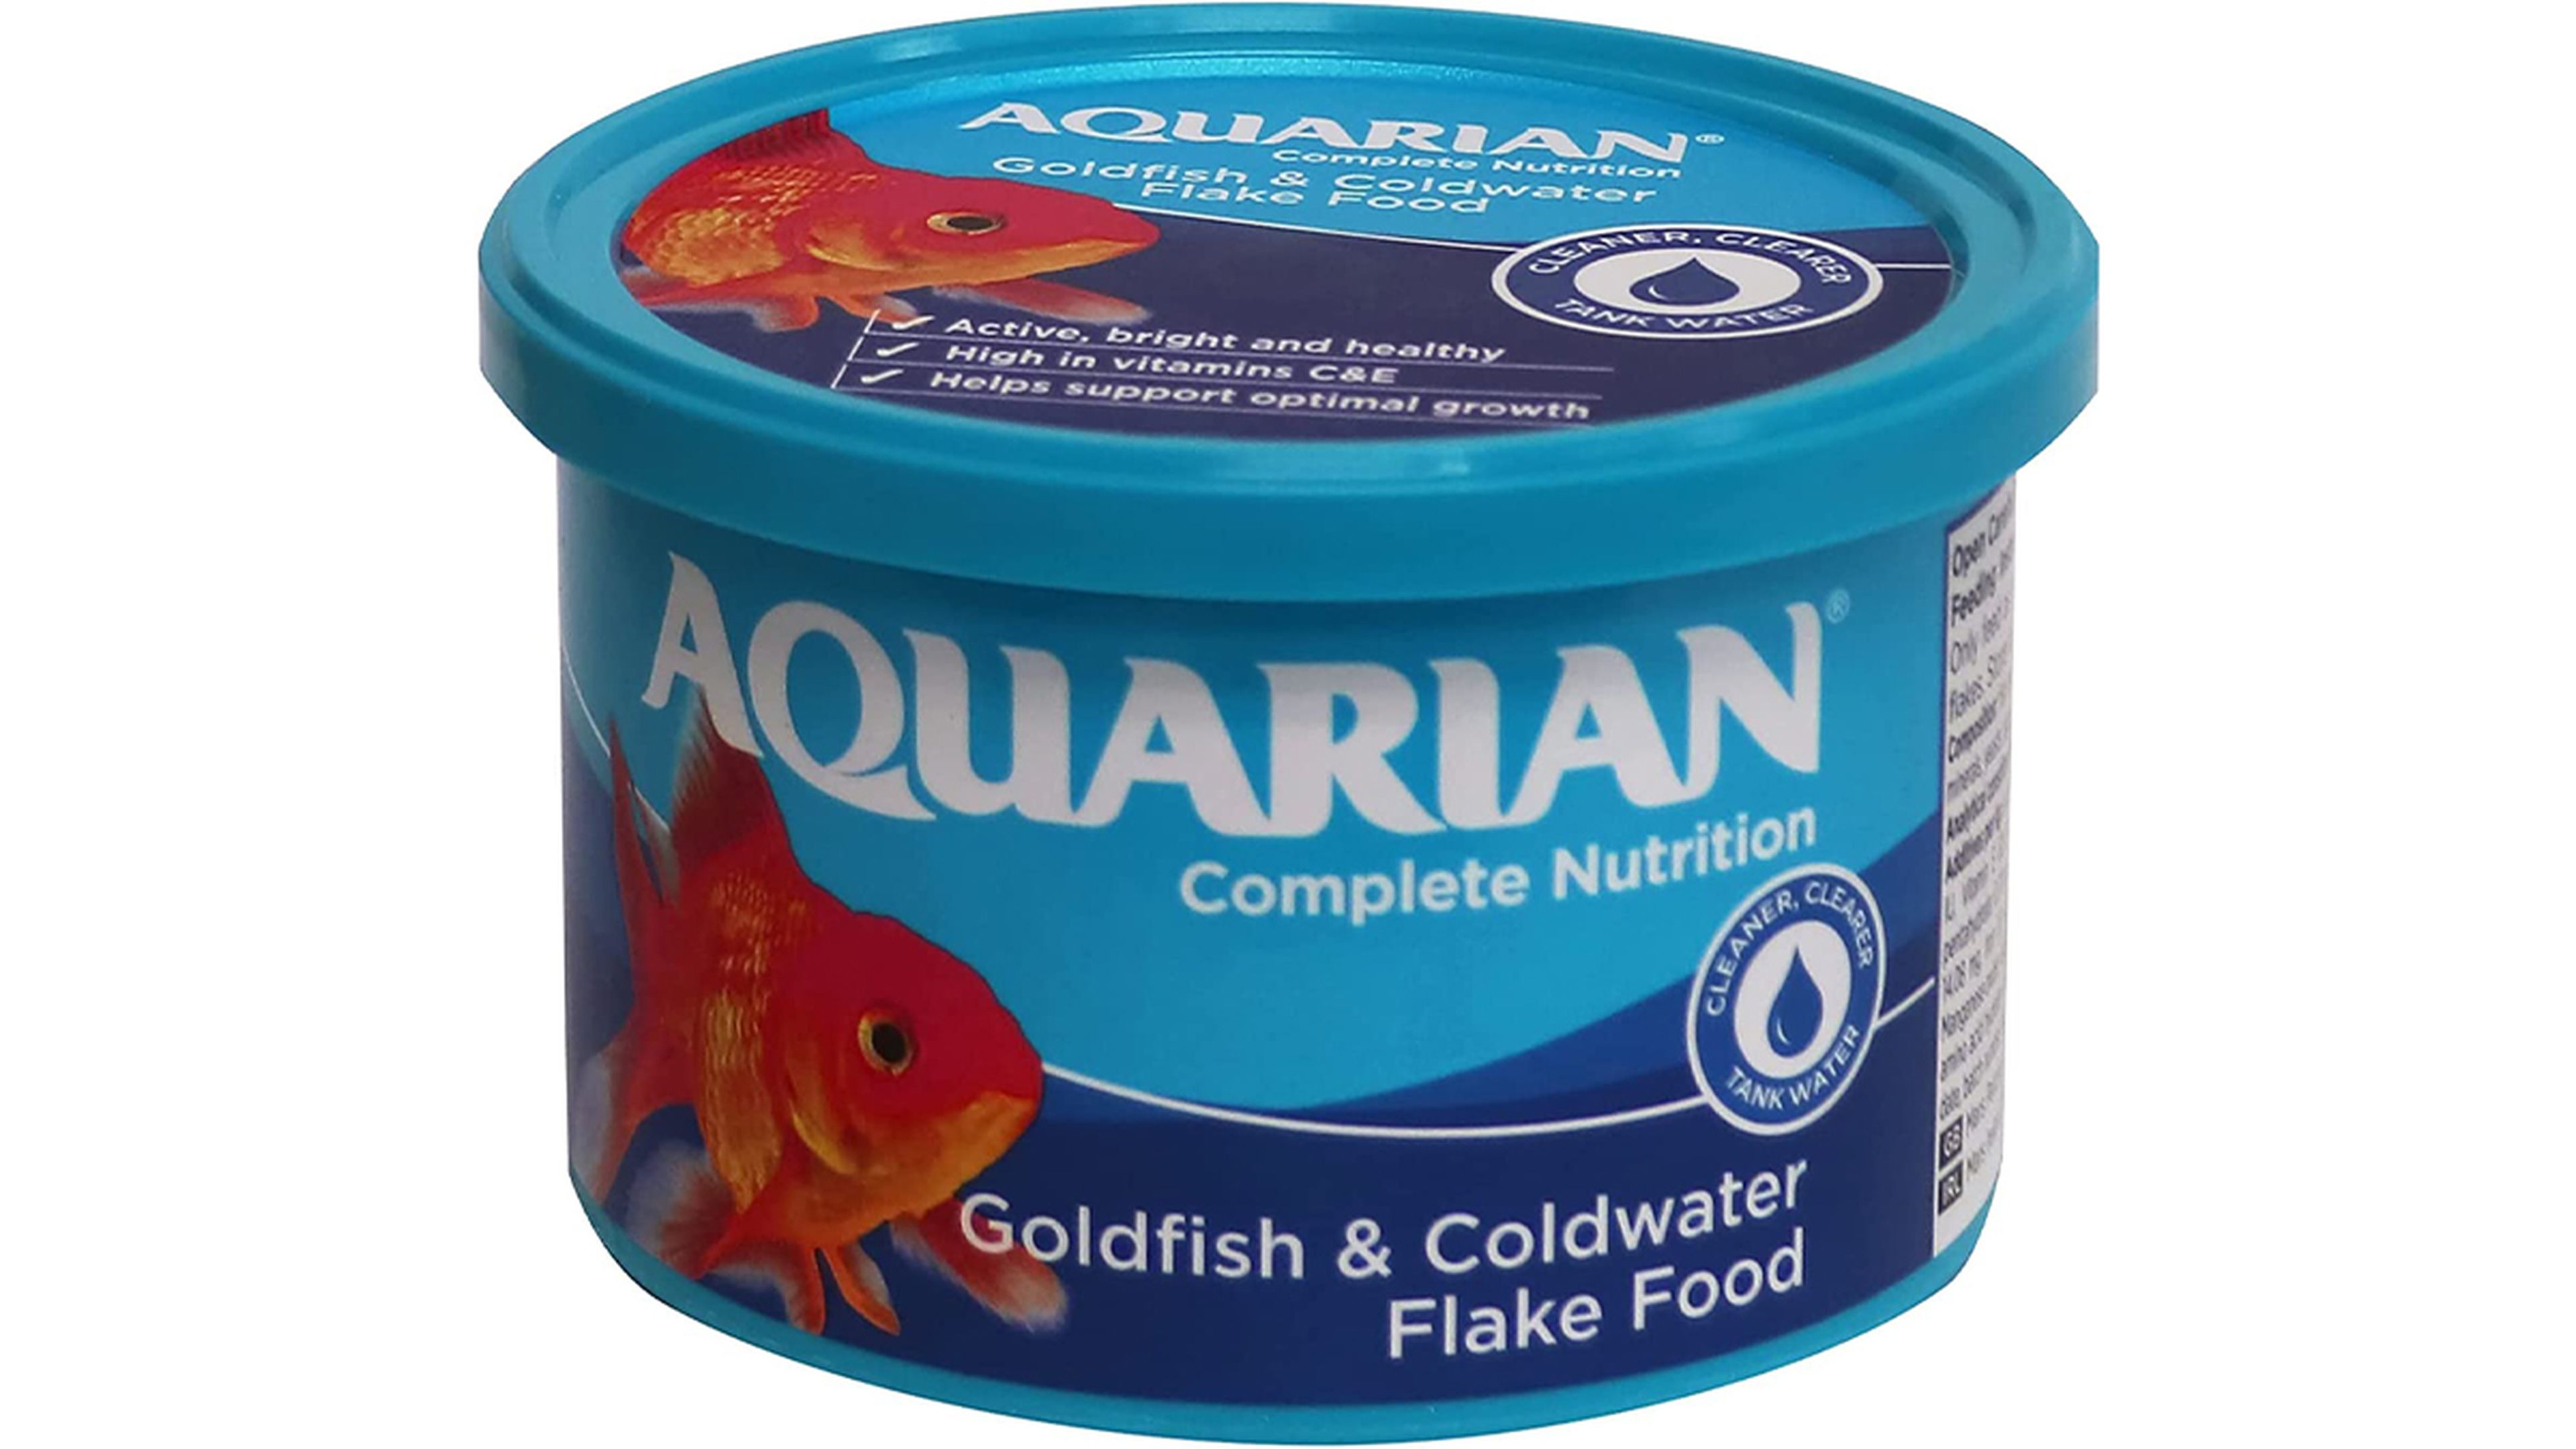 AQUARIAN Complete Nutrition